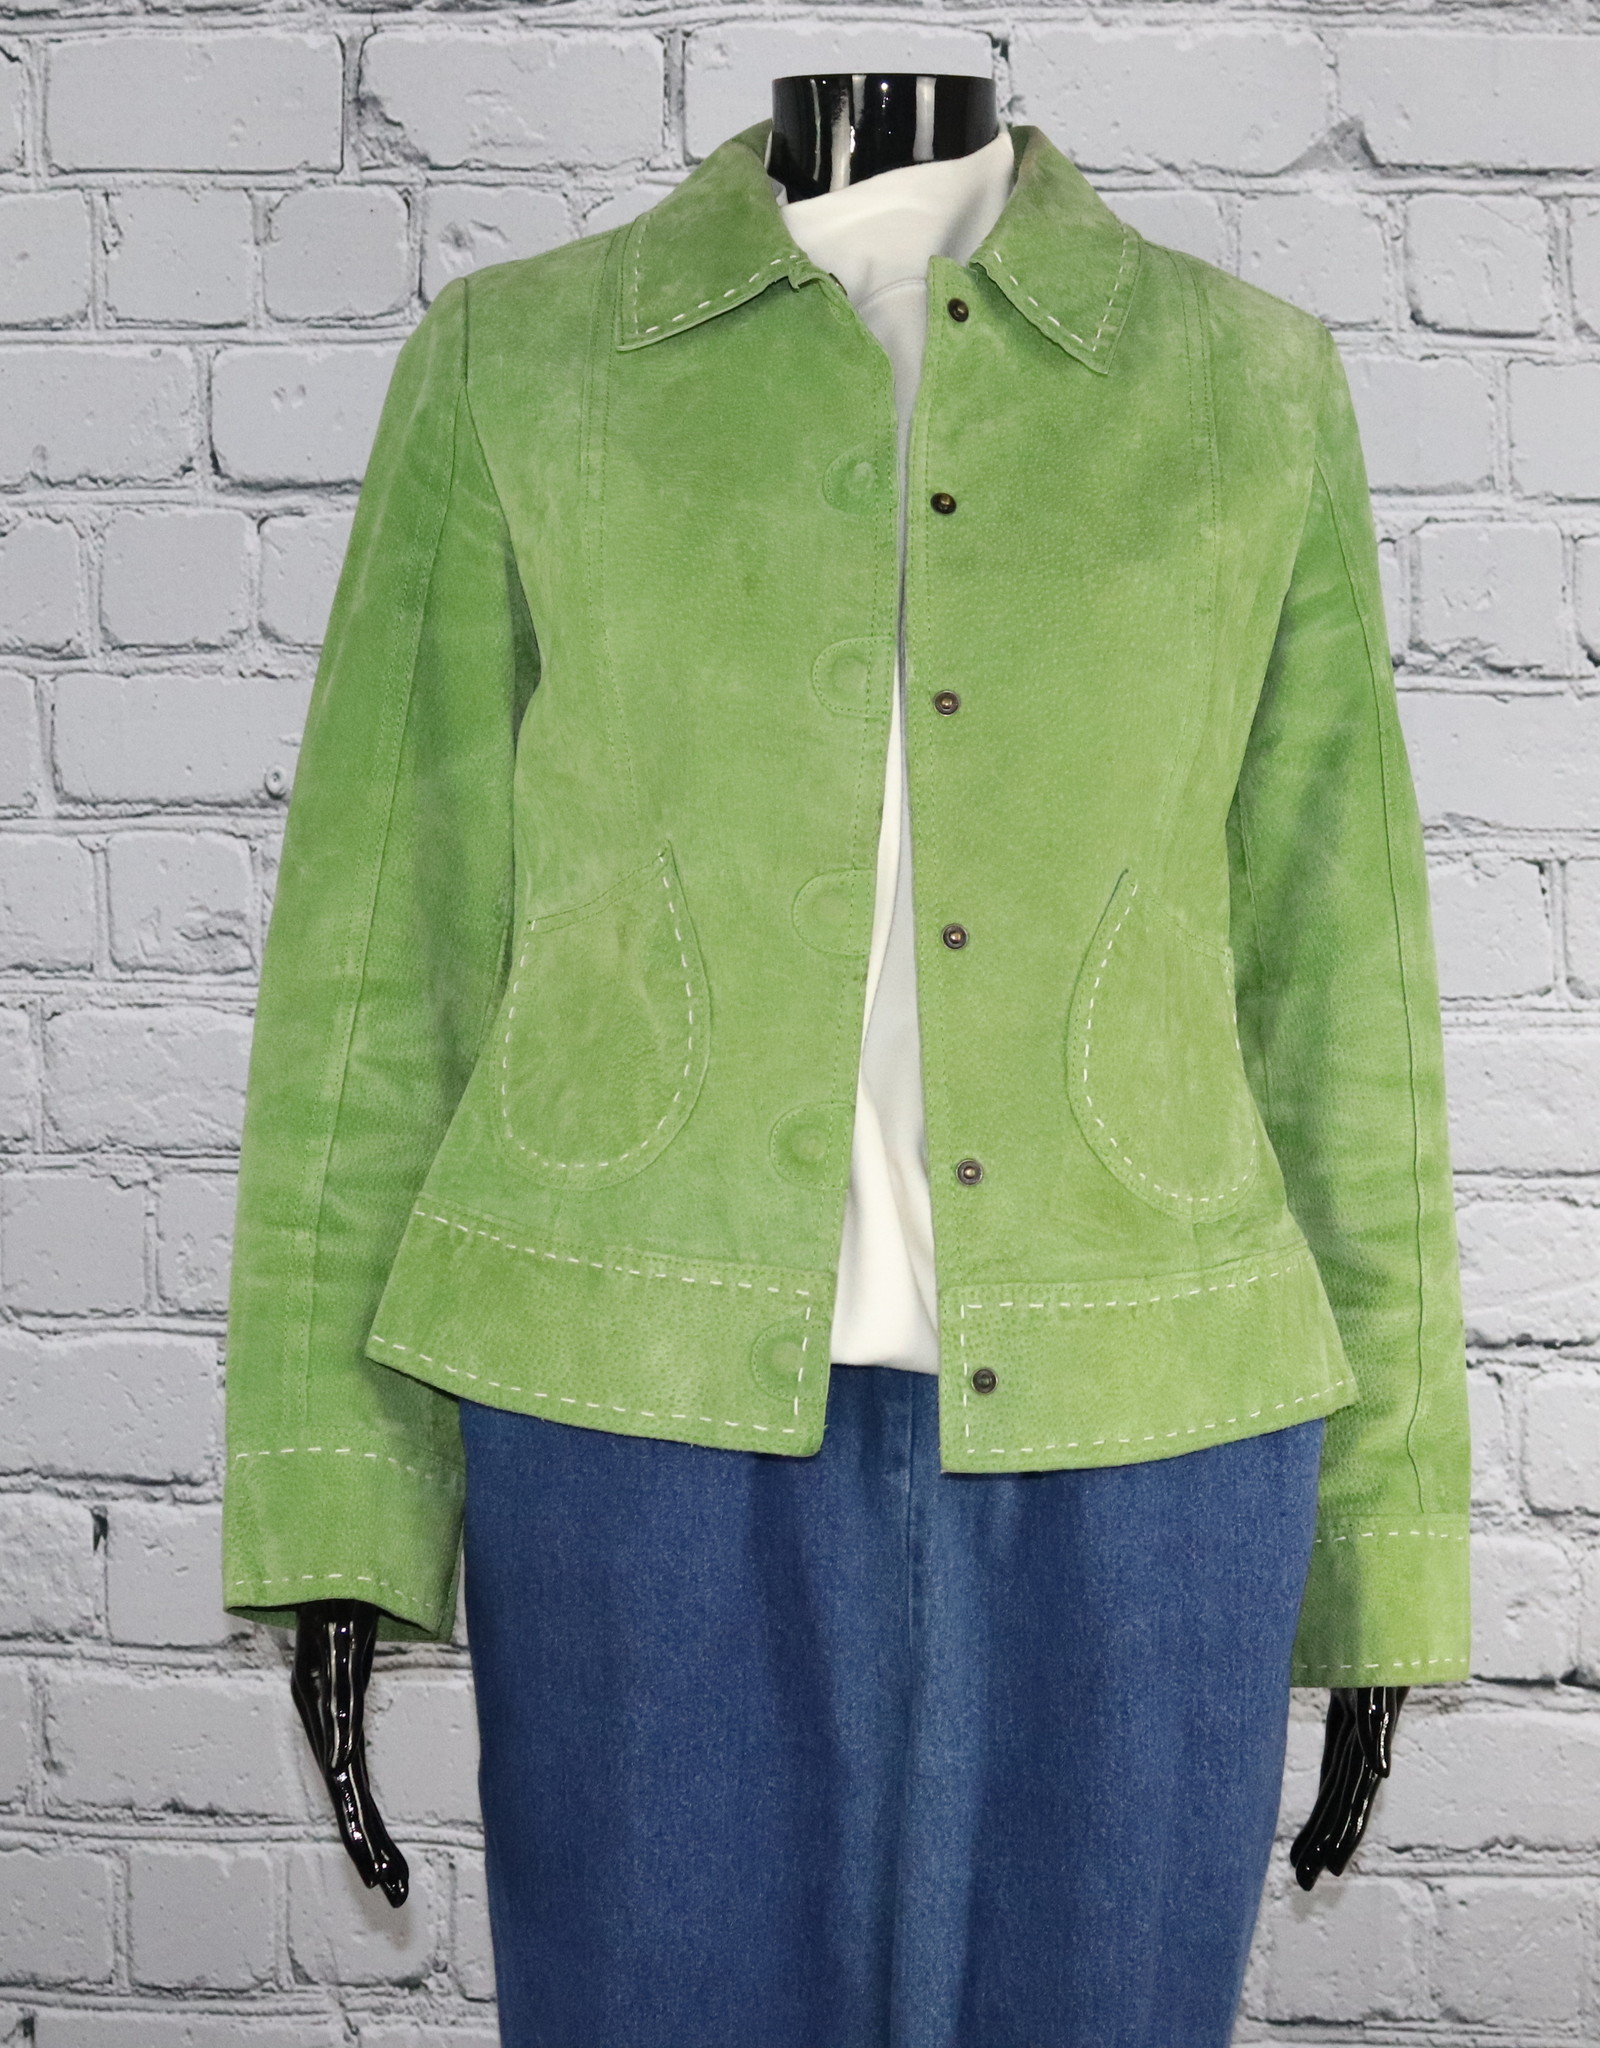 Bamboo Traders: 1970's-1980's Vintage Solid Lime Green Leather Jacket with White Threading for Gals